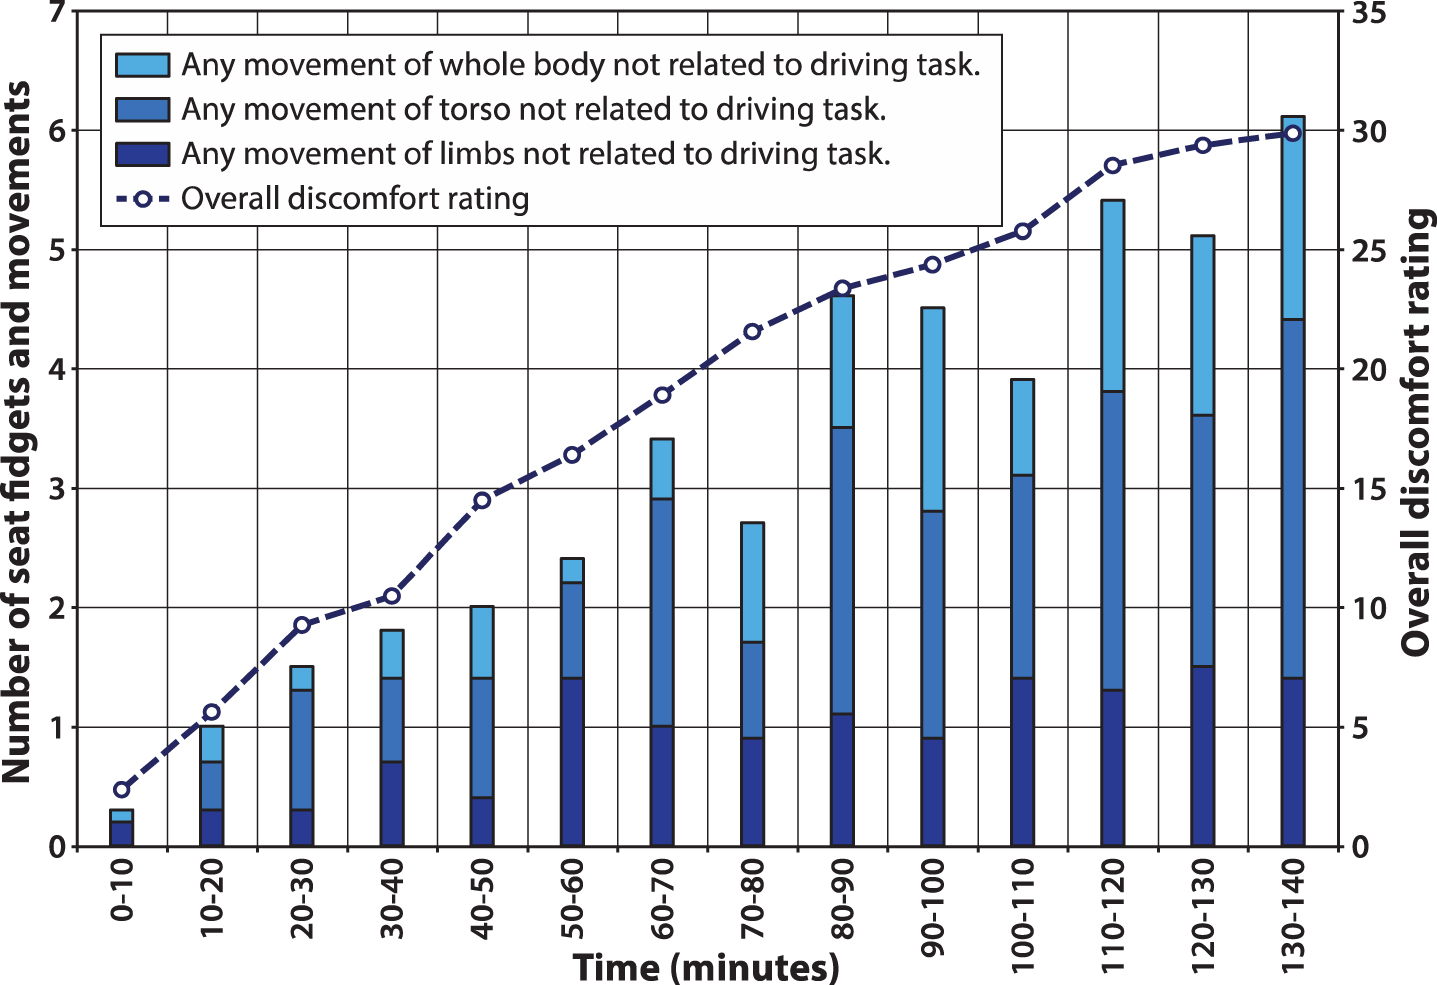 Example of the relation of movement and discomfort (35-point scale), showing the mean overall discomfort rating and number of seat fidgets and movements (SFMs) against time for all participants (n = 10). From Sammonds et al. [25].